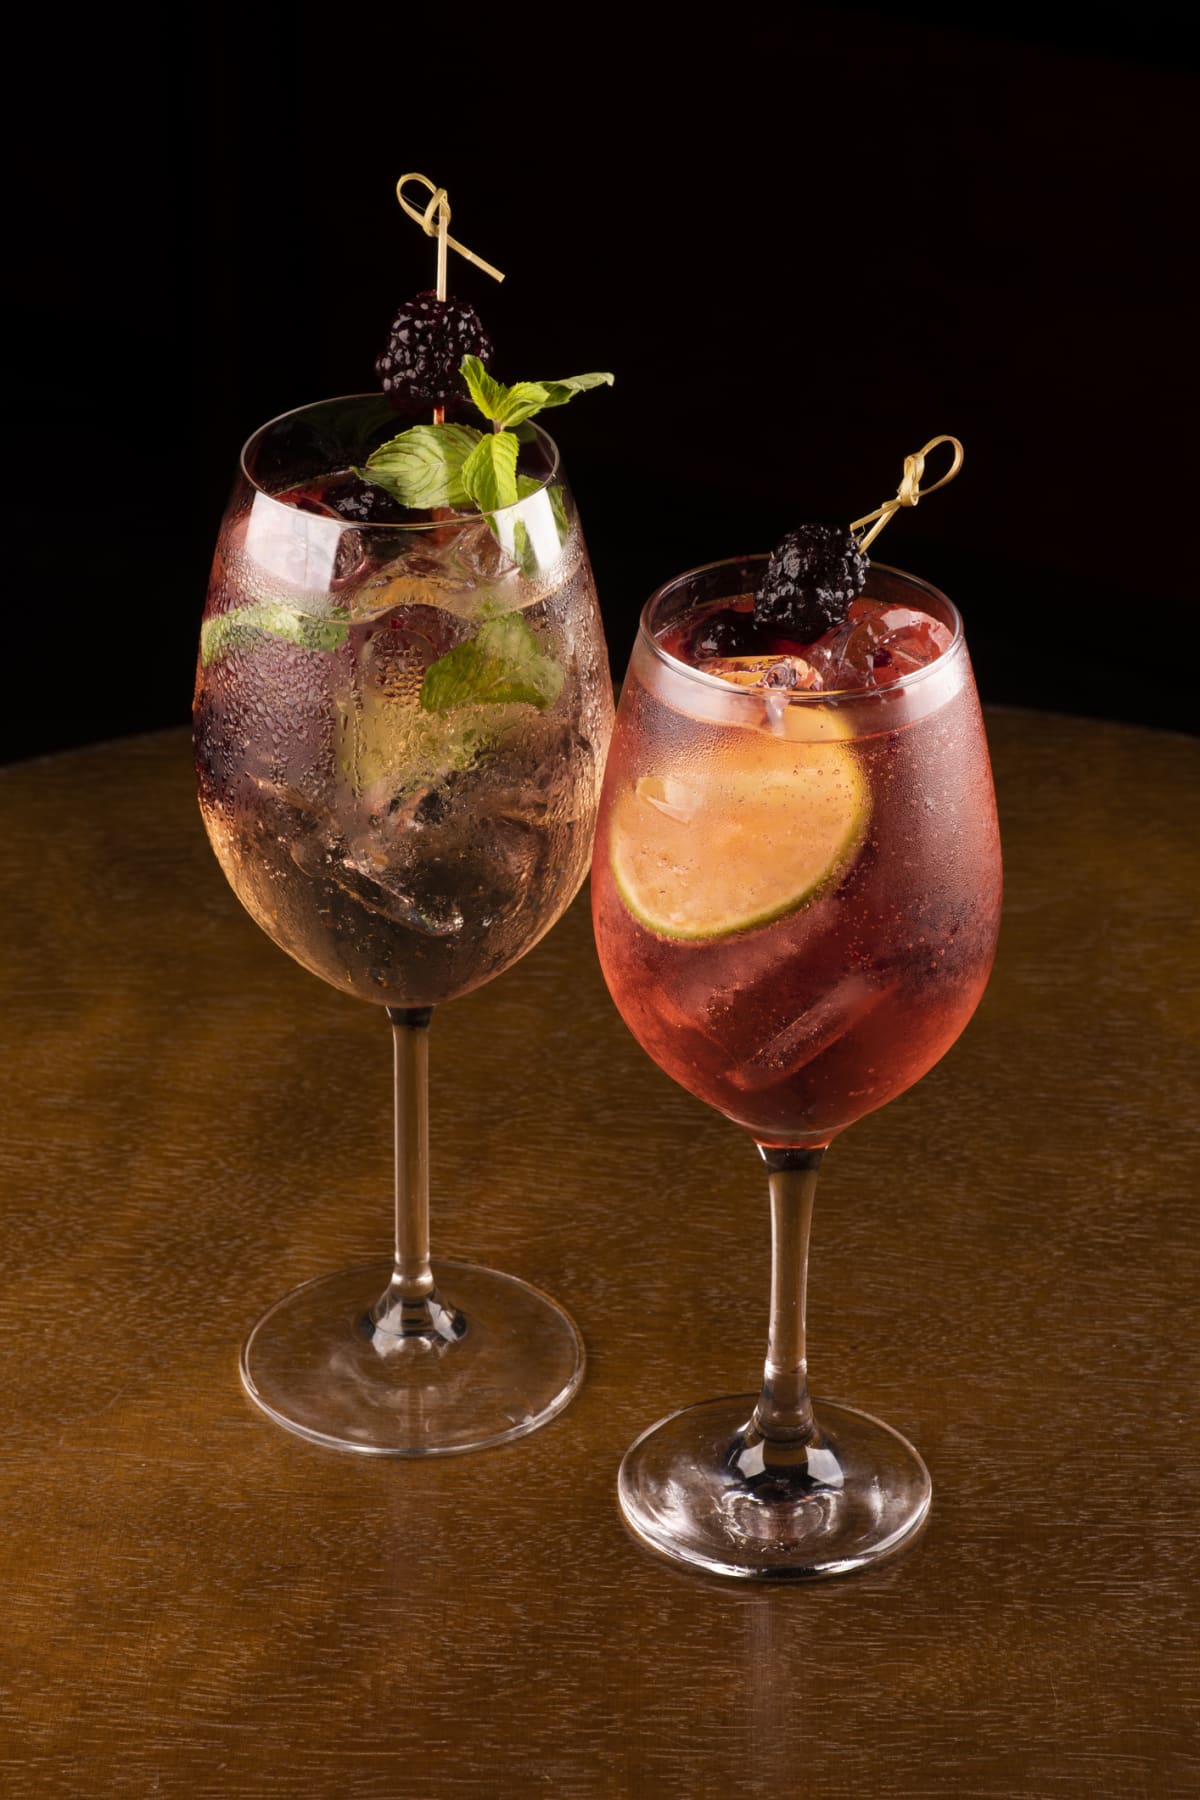 Two spritzes, one with mint and blackberry garnish, the other with orange peel and blackberry garnish